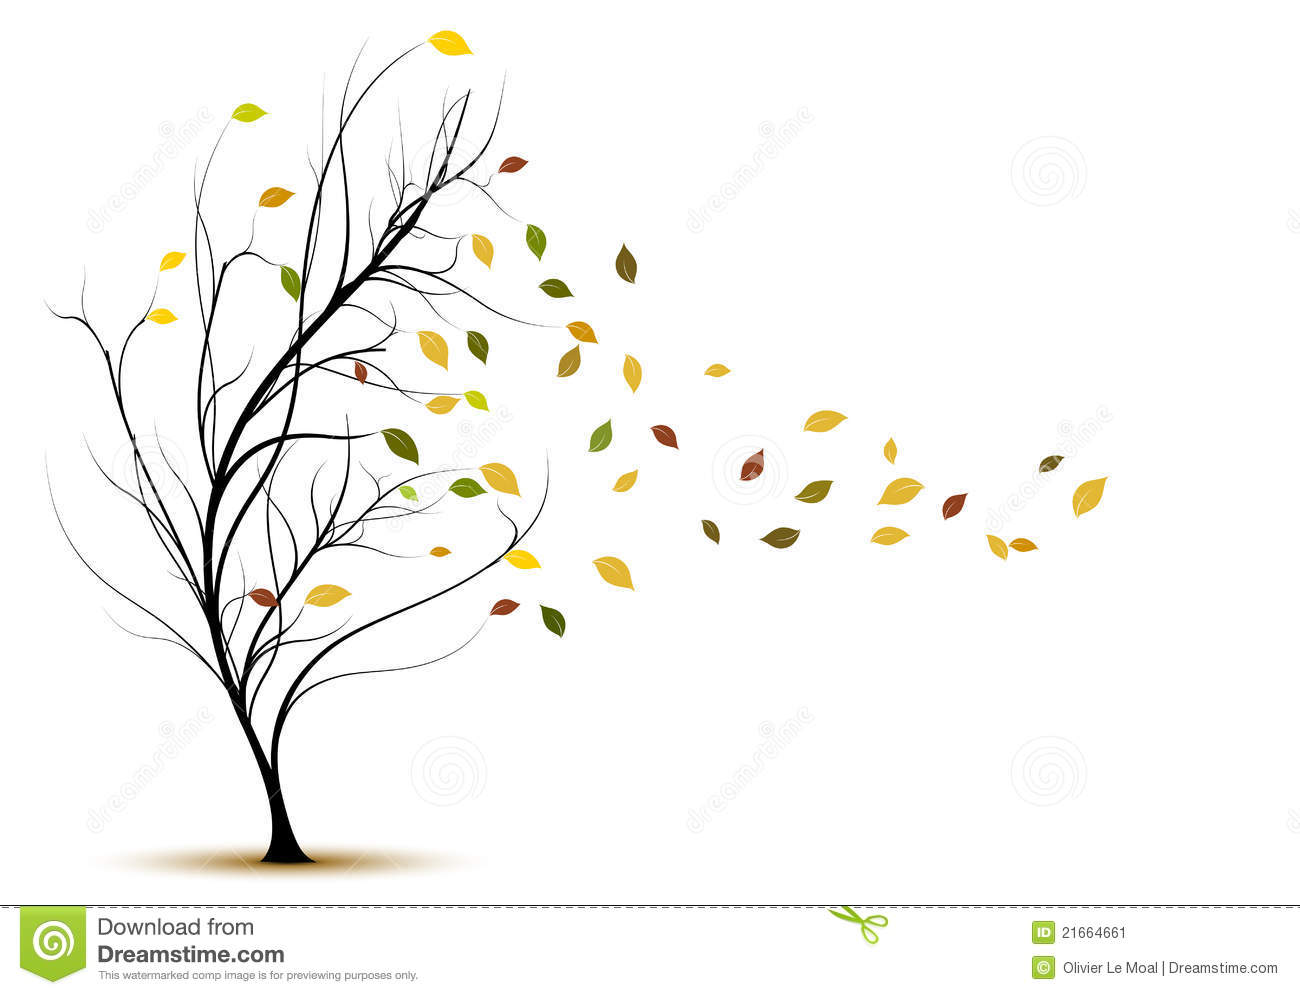 Tree with Leaves Blowing Silhouette